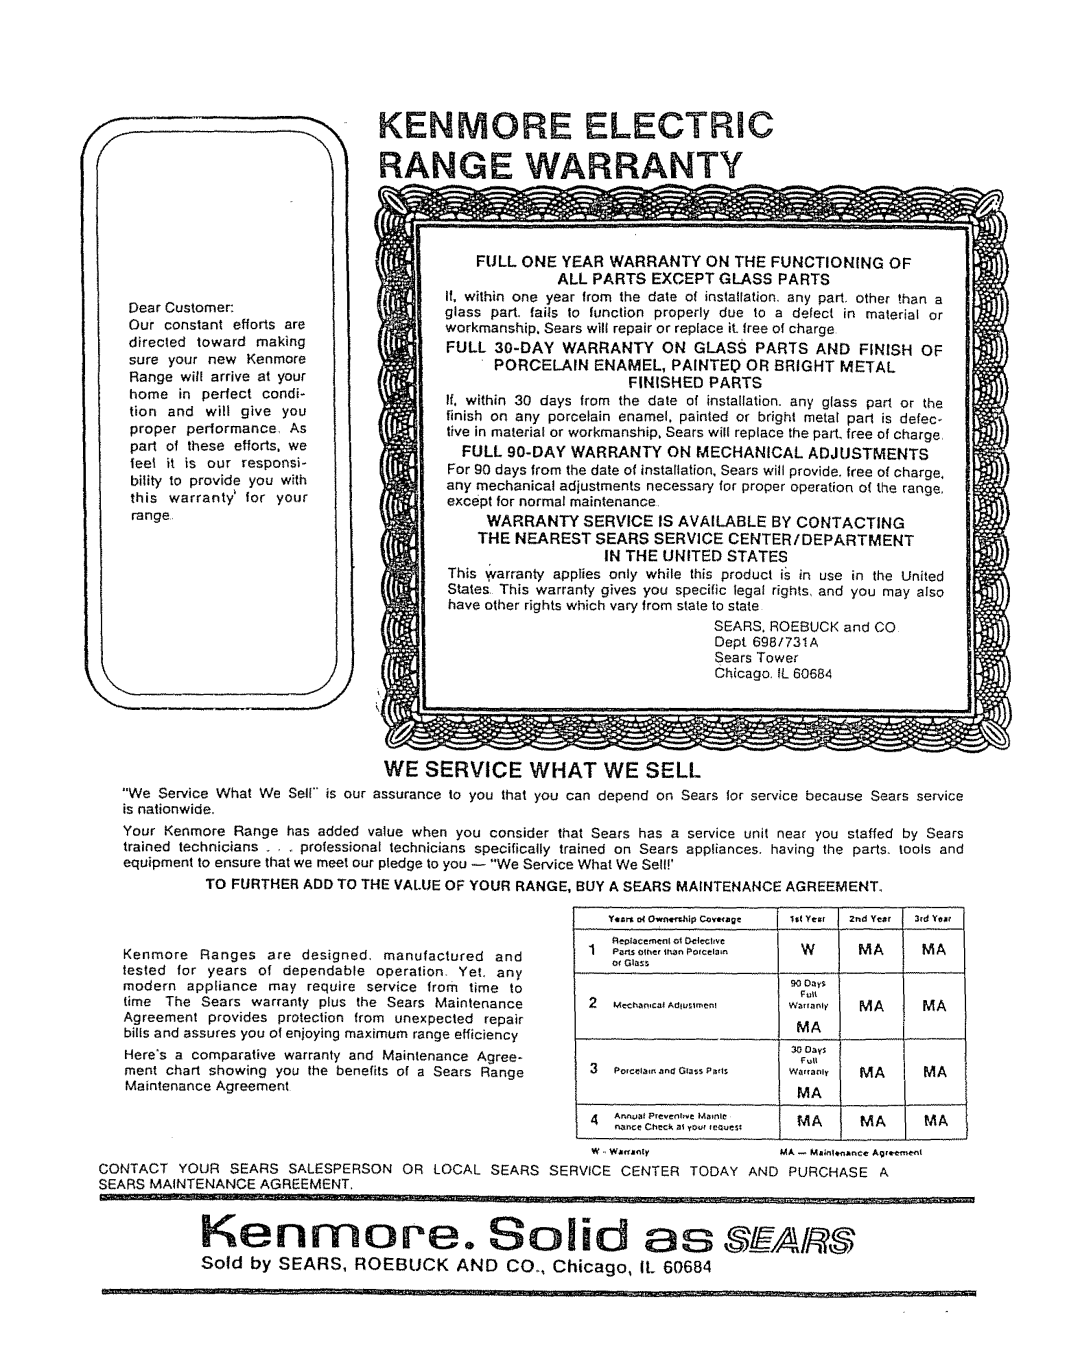 Kenmore 5303304549 manual Kenmore Electric Range Warranty, Sold by SEARS, ROEBUCK AND CO.., Chicago, IL, Nenmore. Solid aa 